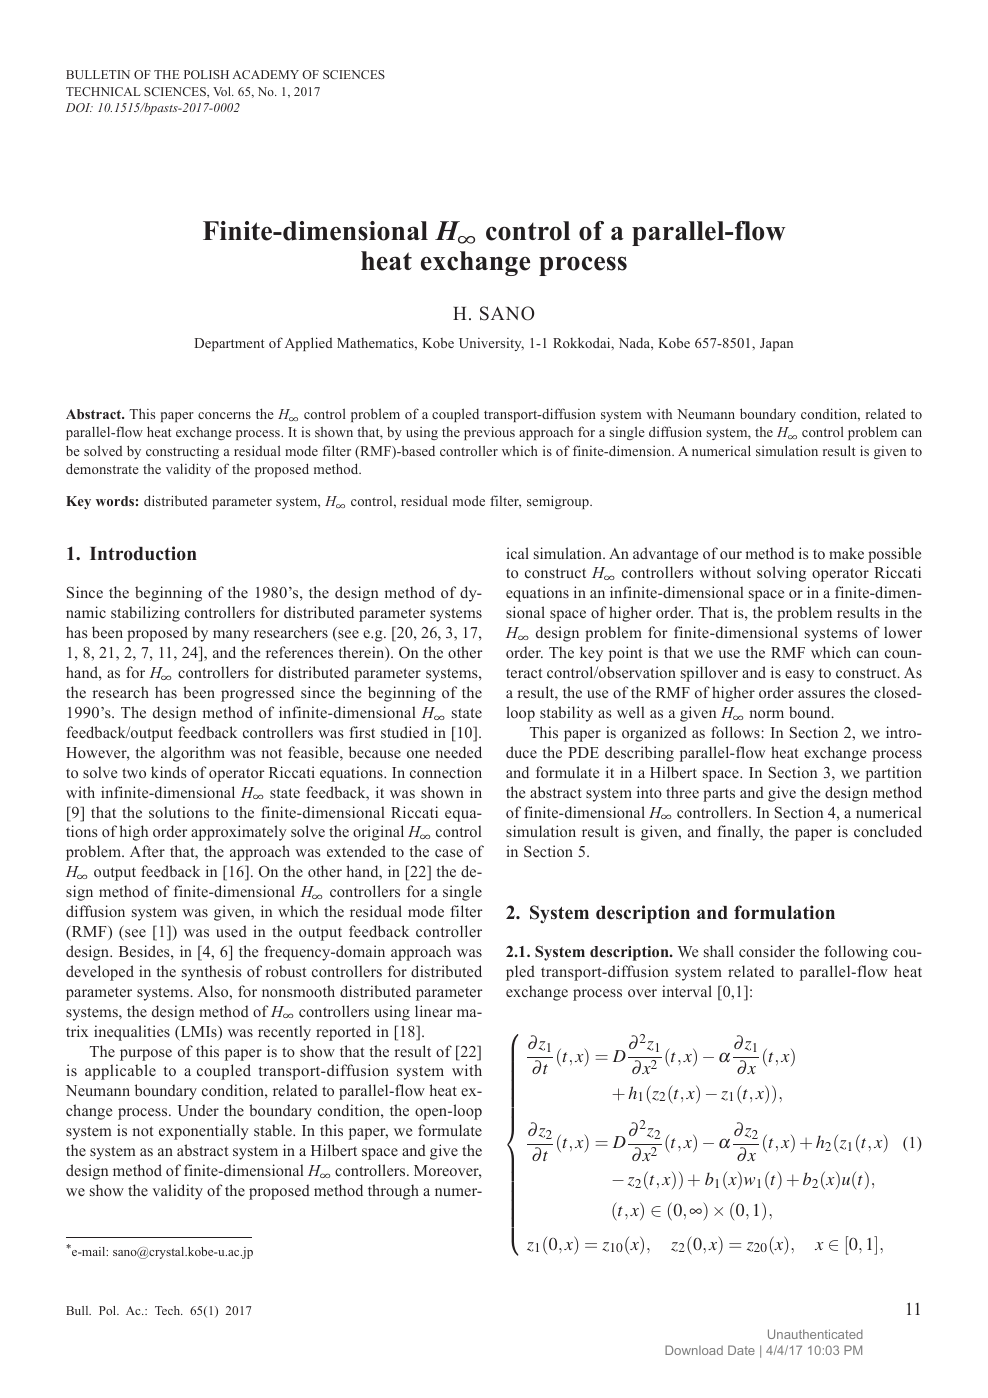 Finite Dimensional H Control Of A Parallel Flow Heat Exchange Process Topic Of Research Paper In Mathematics Download Scholarly Article Pdf And Read For Free On Cyberleninka Open Science Hub